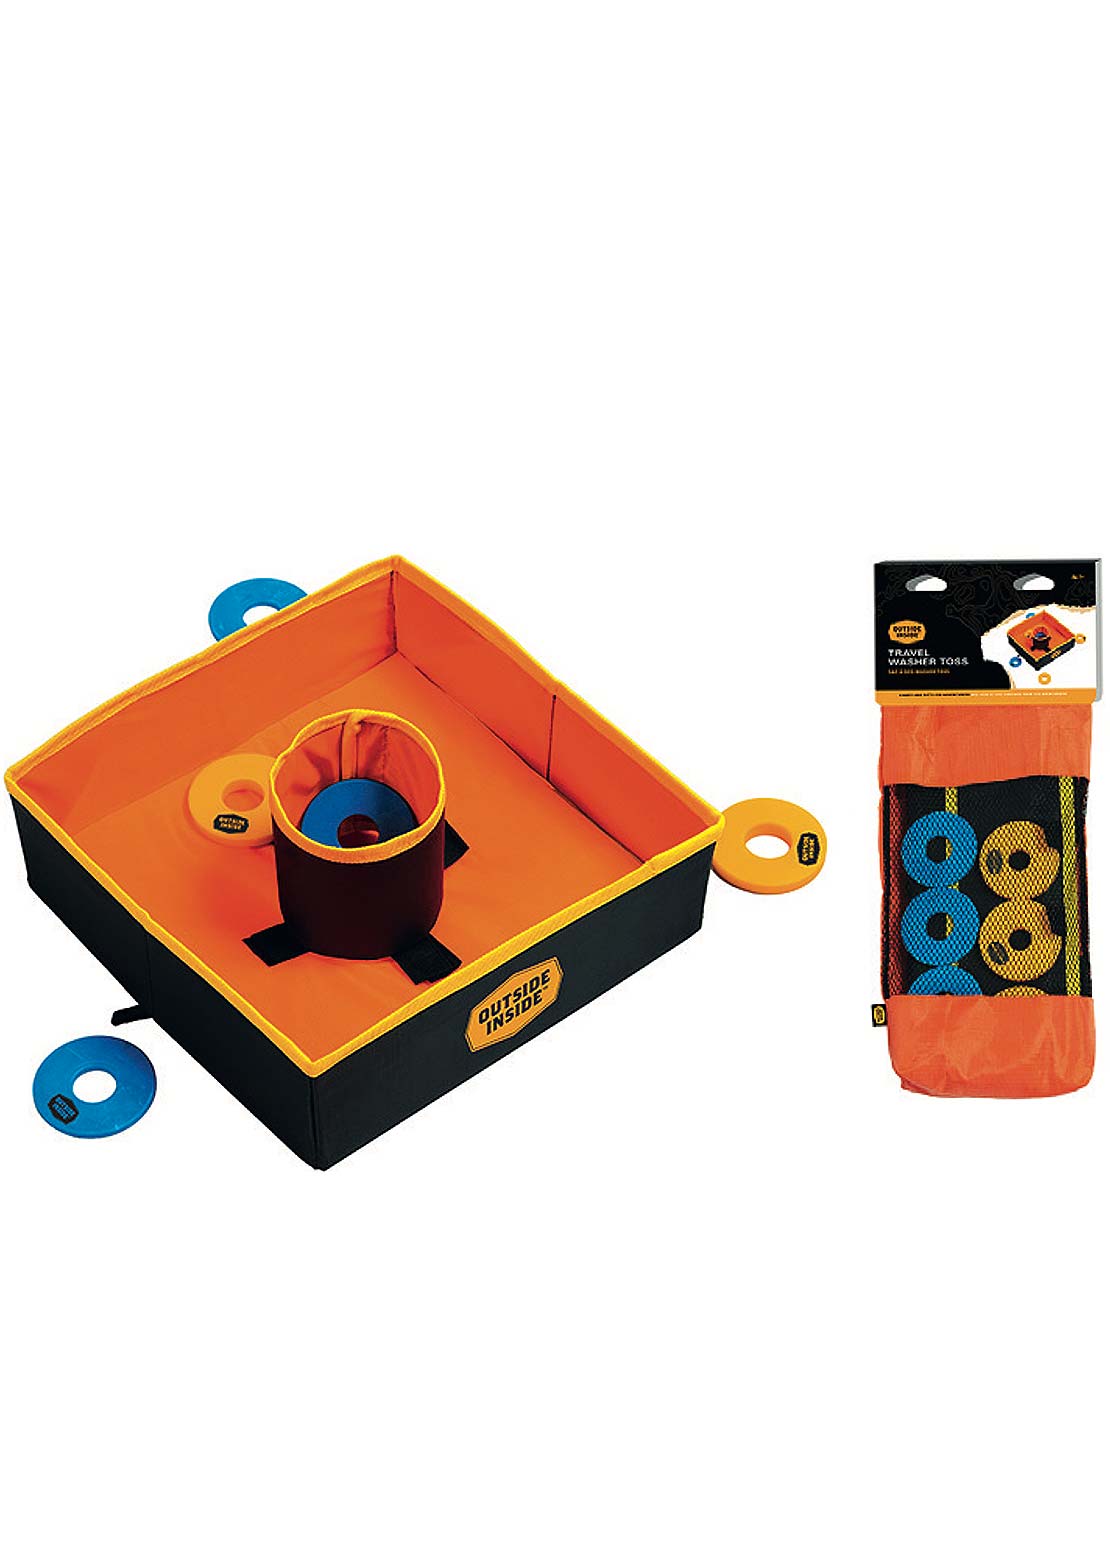 GSI Travel Washer Toss Game